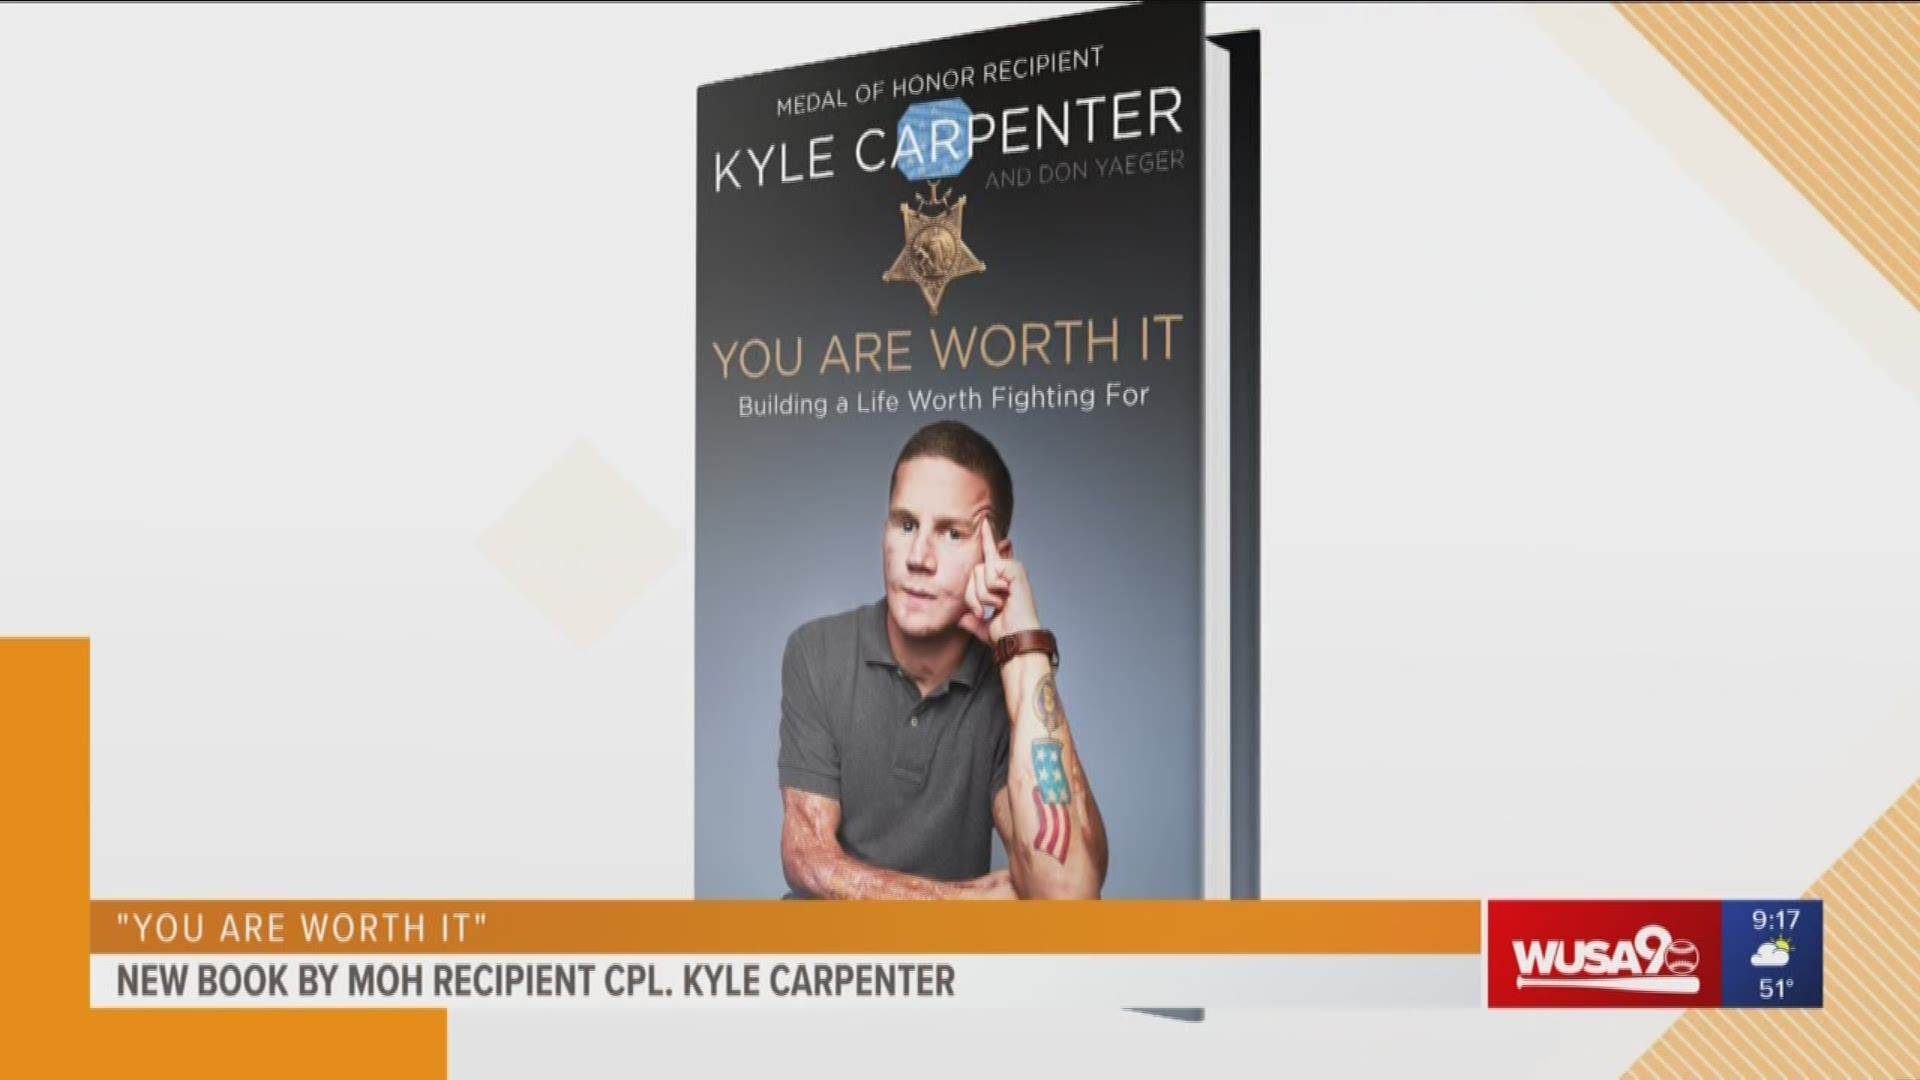 Marine Corporal Kyle Carpenter's life was changed after a courageous act during his time in Afghanistan. Now, Carpenter has a new book that discusses that and more.